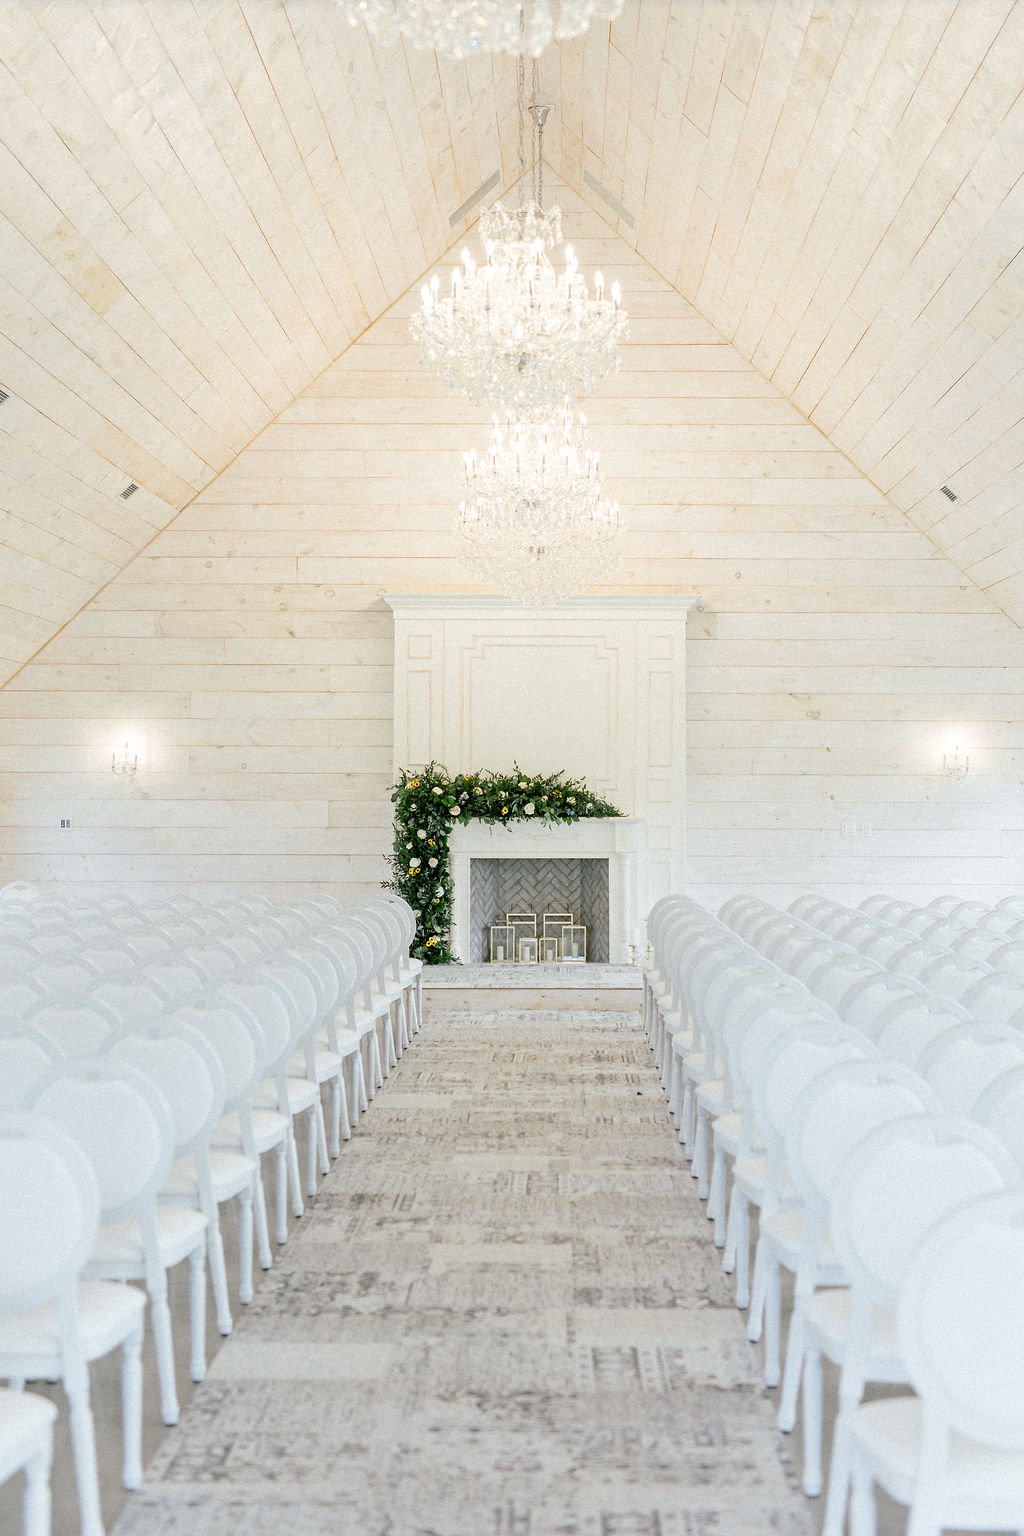 Floral Reef Designs Ottawa Wedding Florist - Amy Pinder Photography - Stonefields Estate wedding - greenery at altar in white barn room